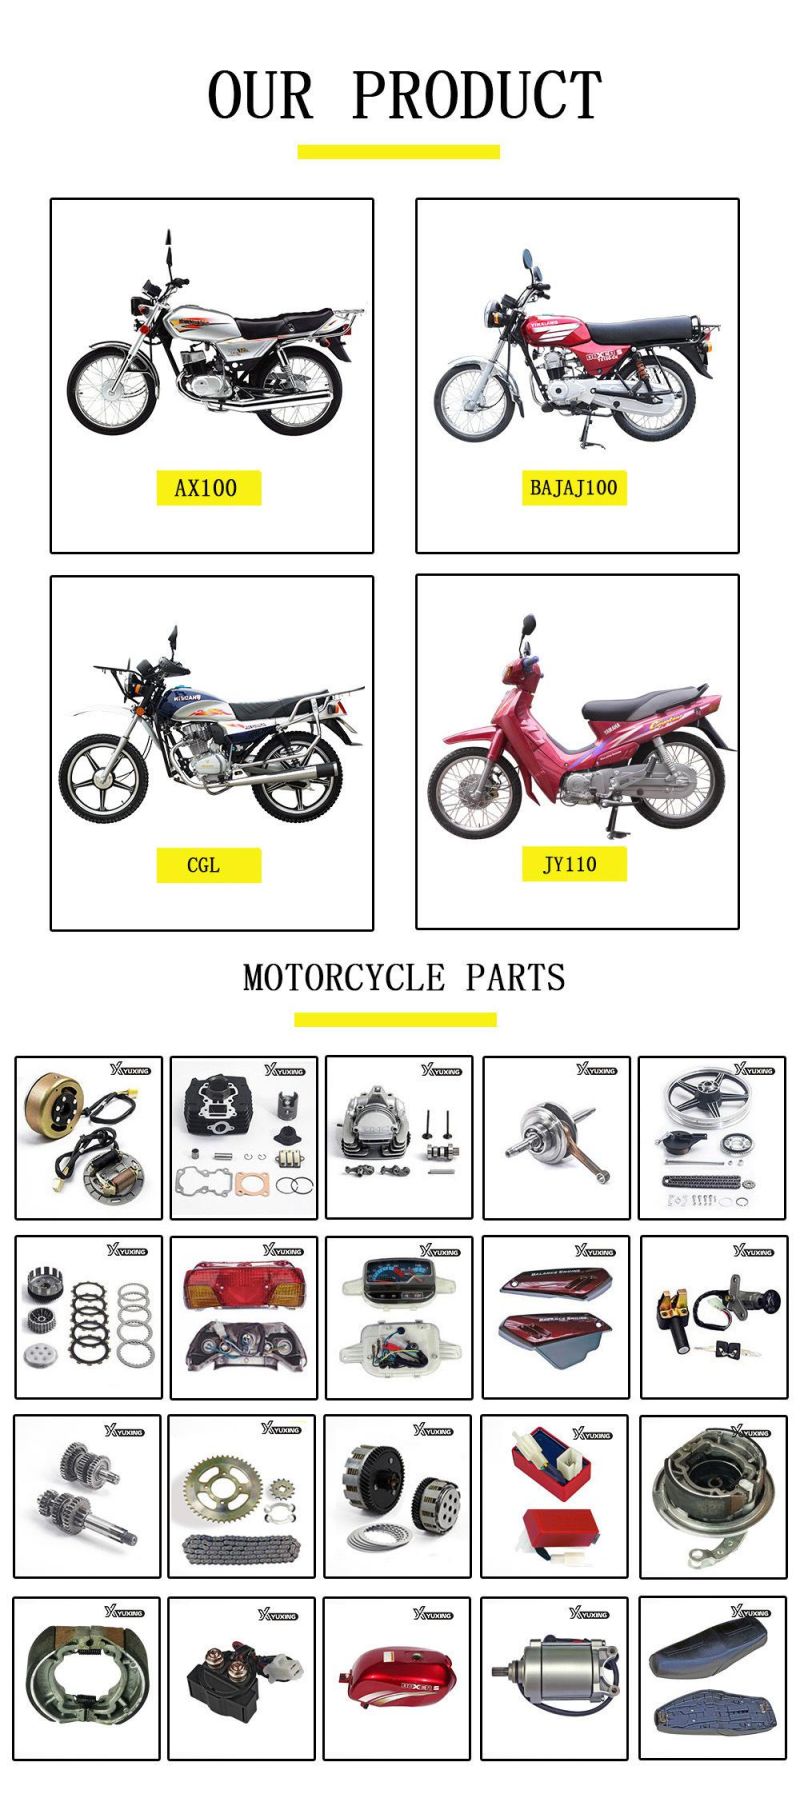 Factory Motorcycle Spare Parts Maintenance-Free Ytx7l-BS 12V7ah Motorcycle Battery for Motorbike